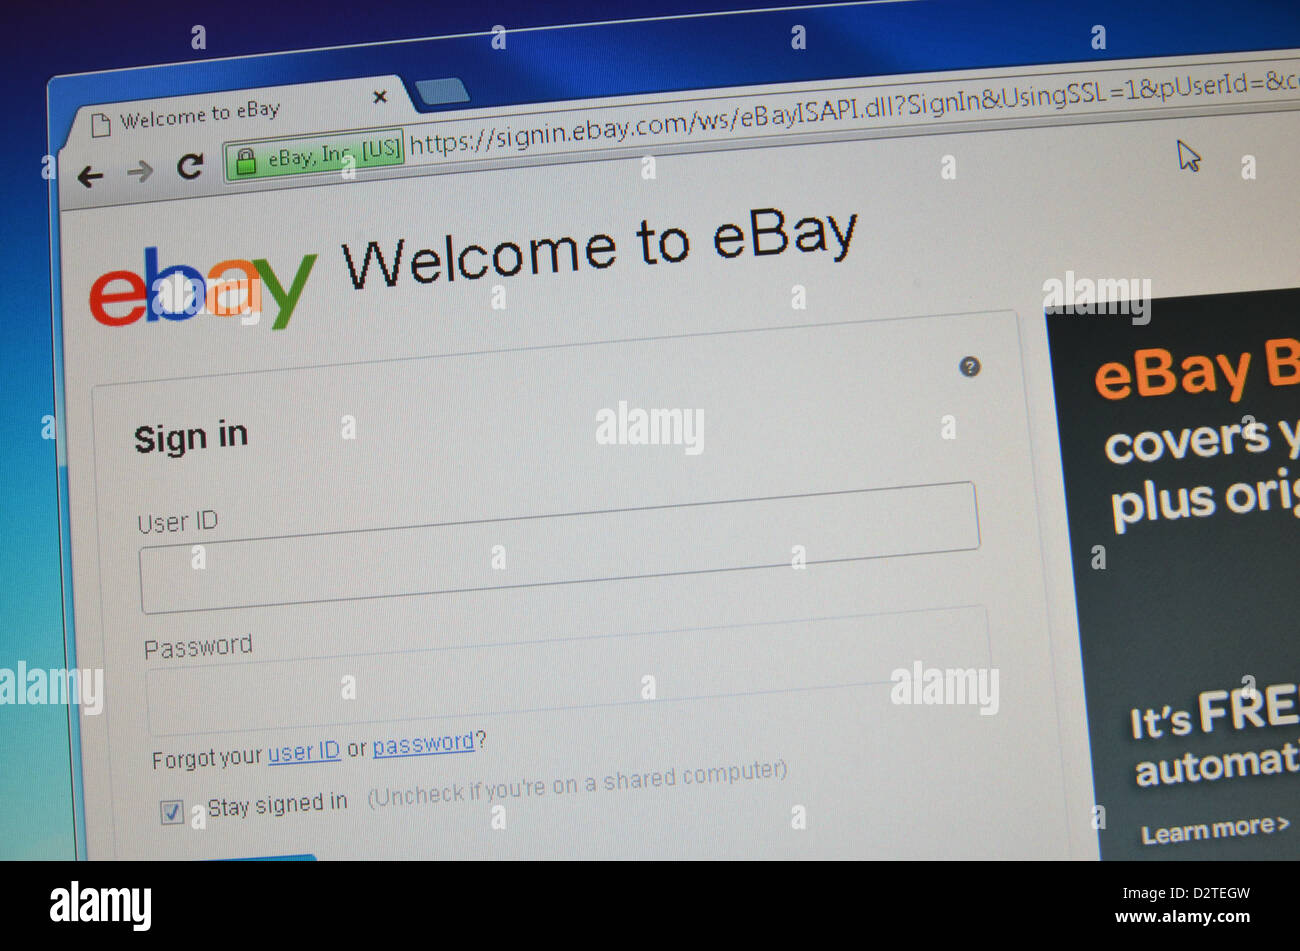 Ebay sign in page website screenshot Stock Photo